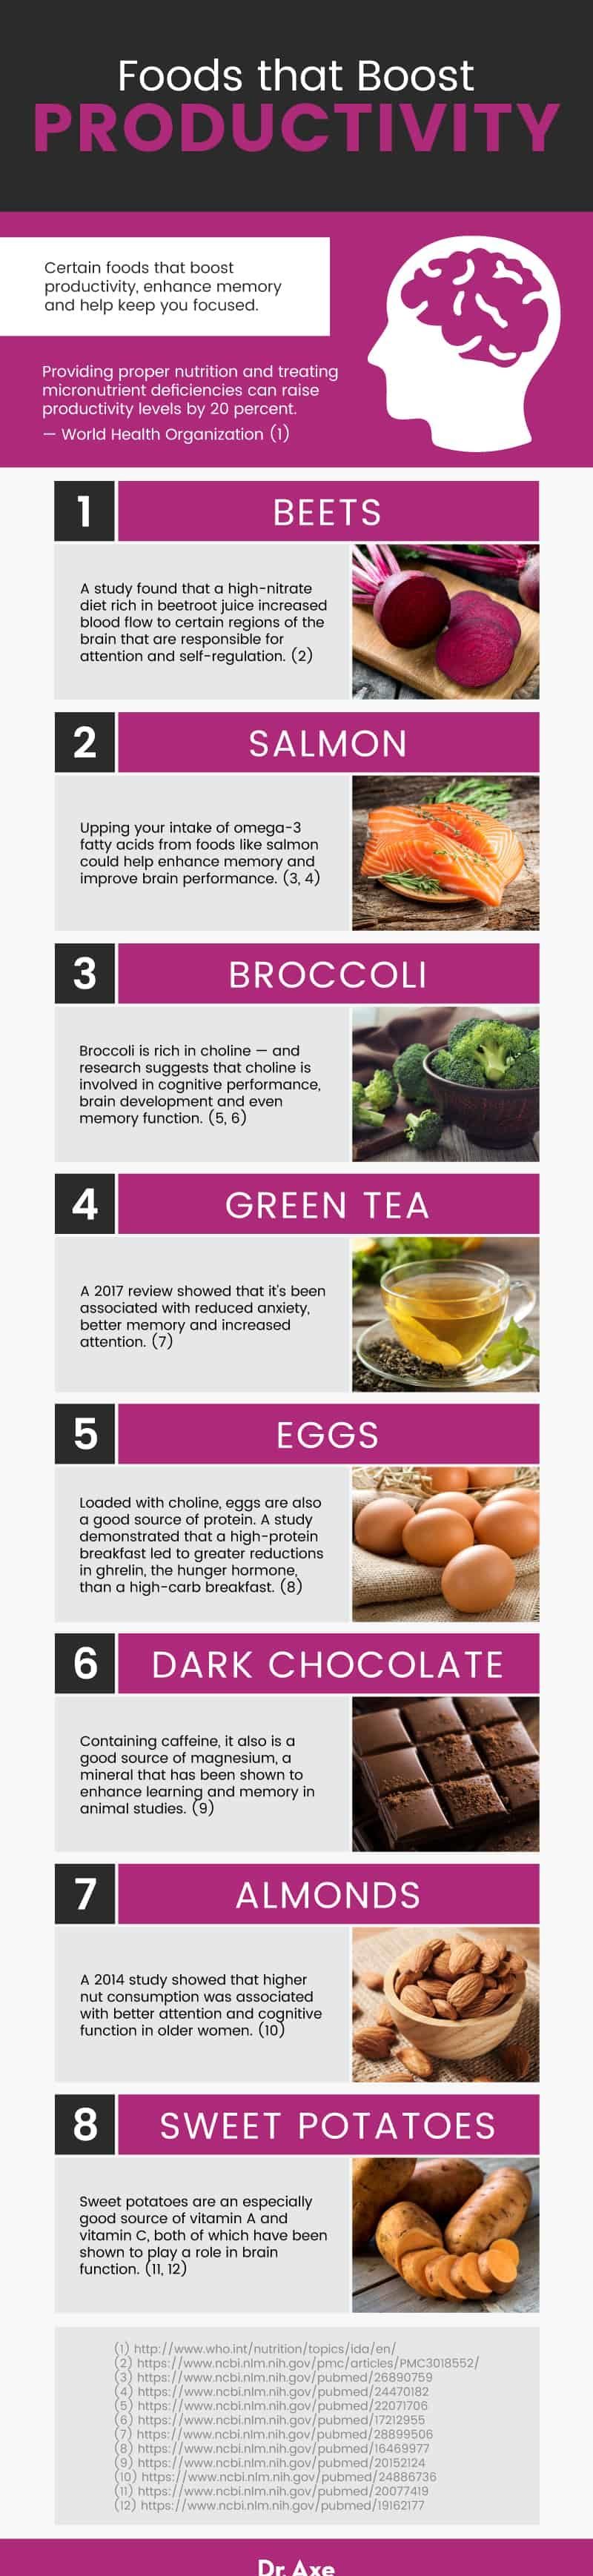 Foods that boost productivity